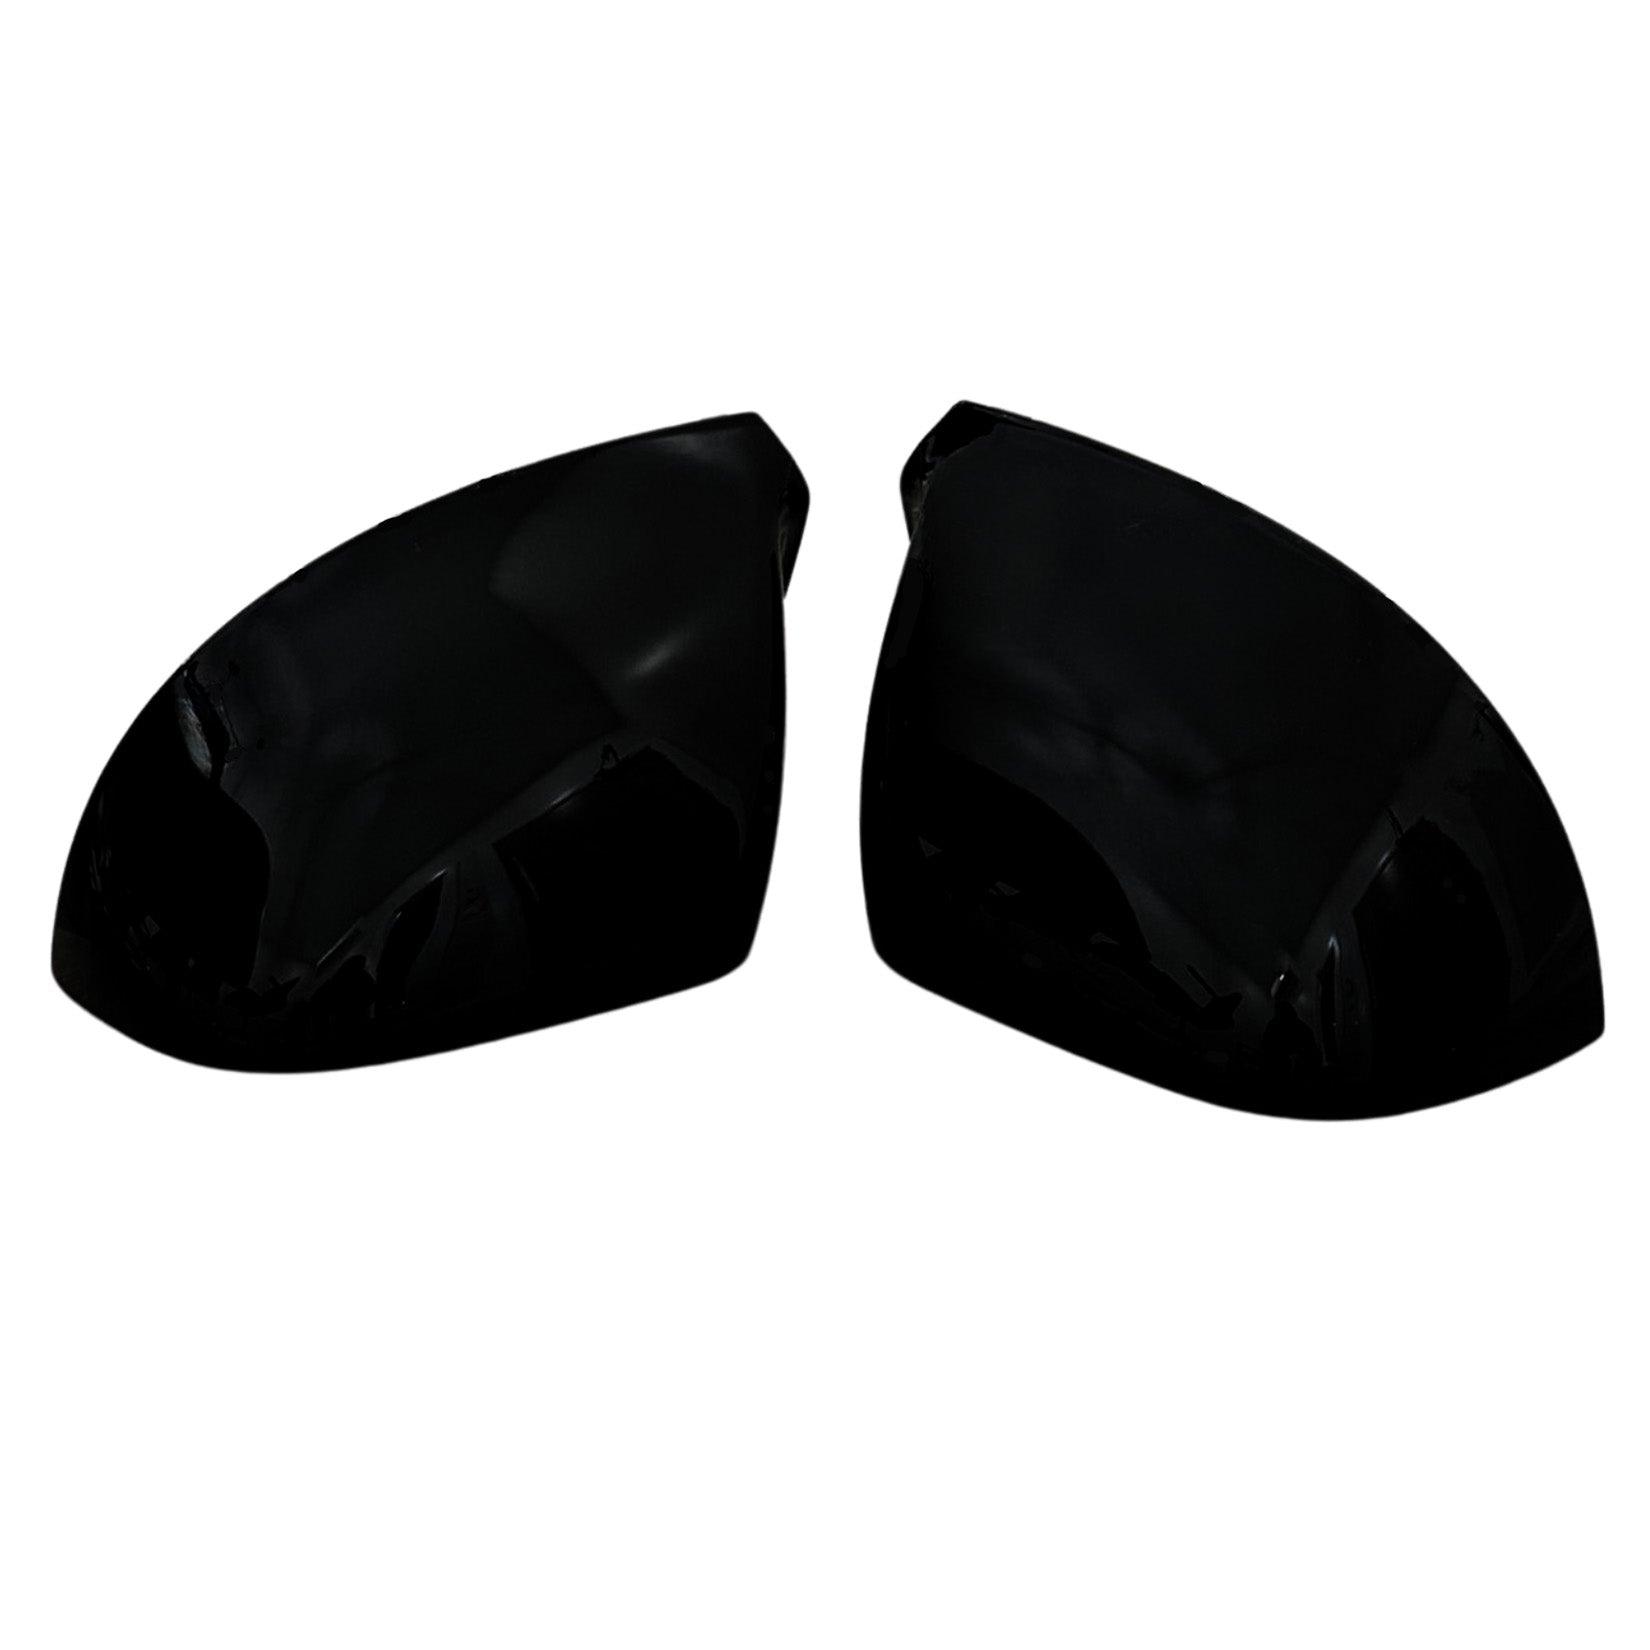 VW TRANSPORTER T5 T6 T6.1 MIRROR COVERS IN GLOSS BLACK - PAIR - Storm Xccessories